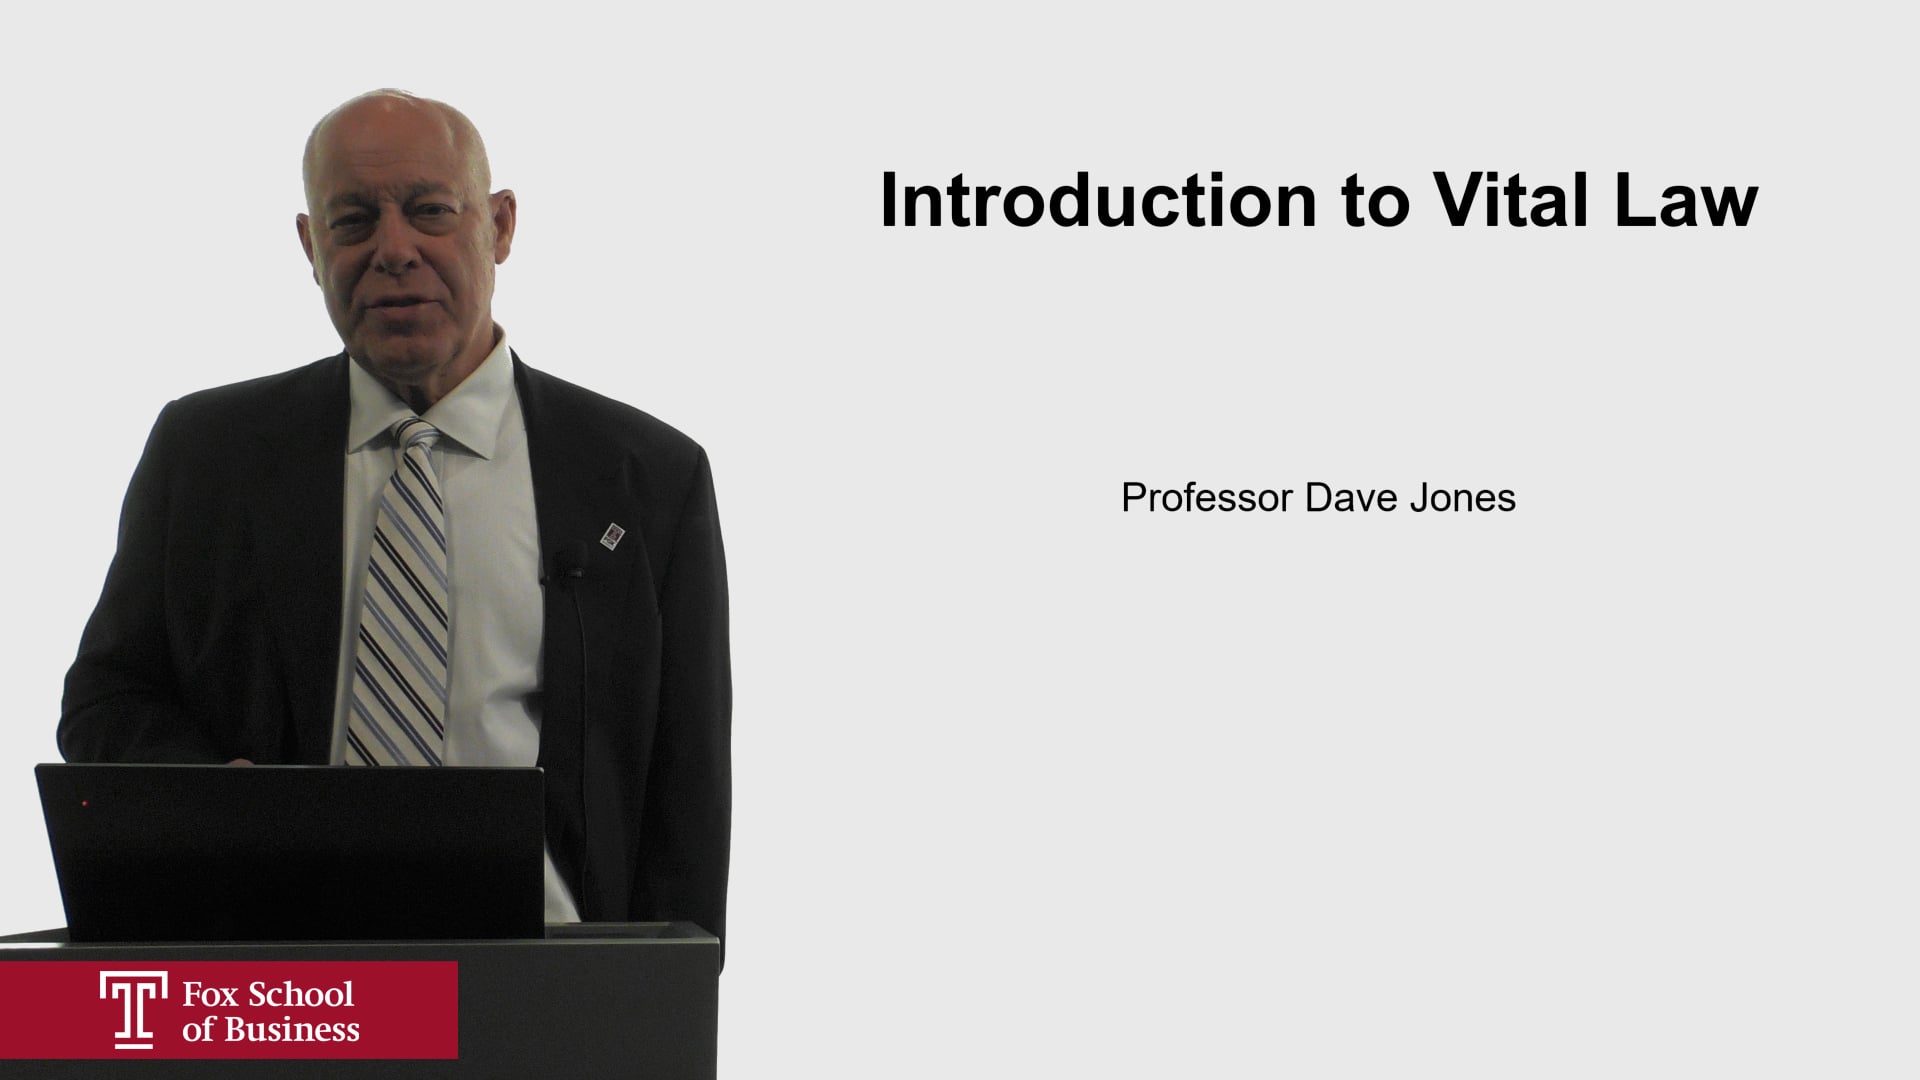 Introduction to Vital Law